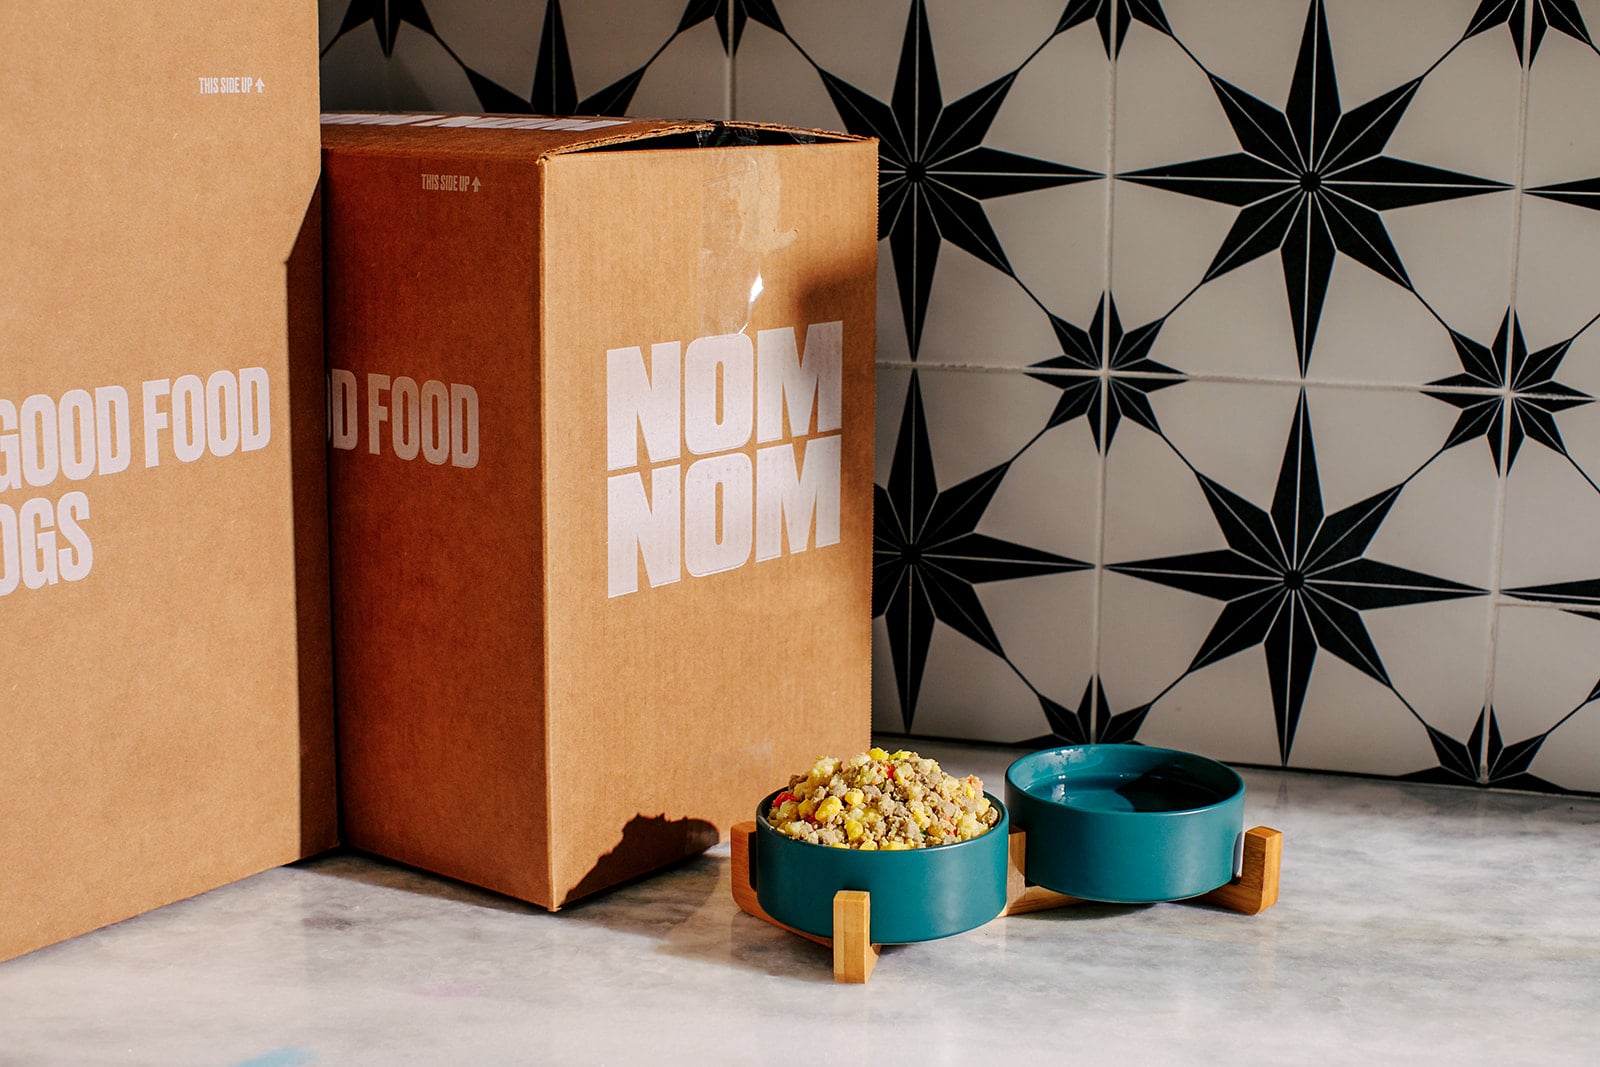 a nom nom dog food in a bowl in front of its box